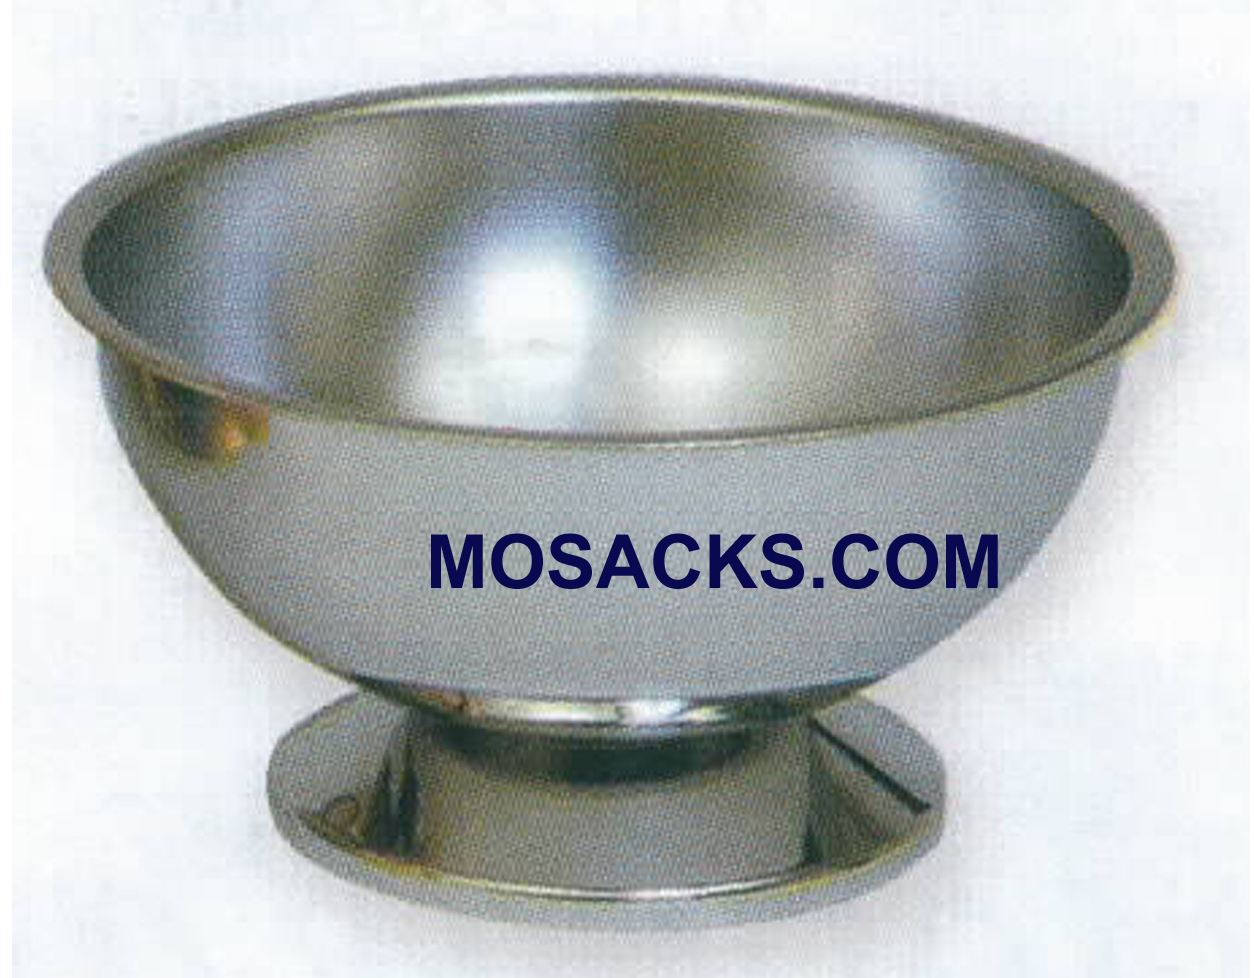 Stainless Steel Baptismal Bowl measures 8" in Diameter and 4" in Height on a 4-1/4" Base K307